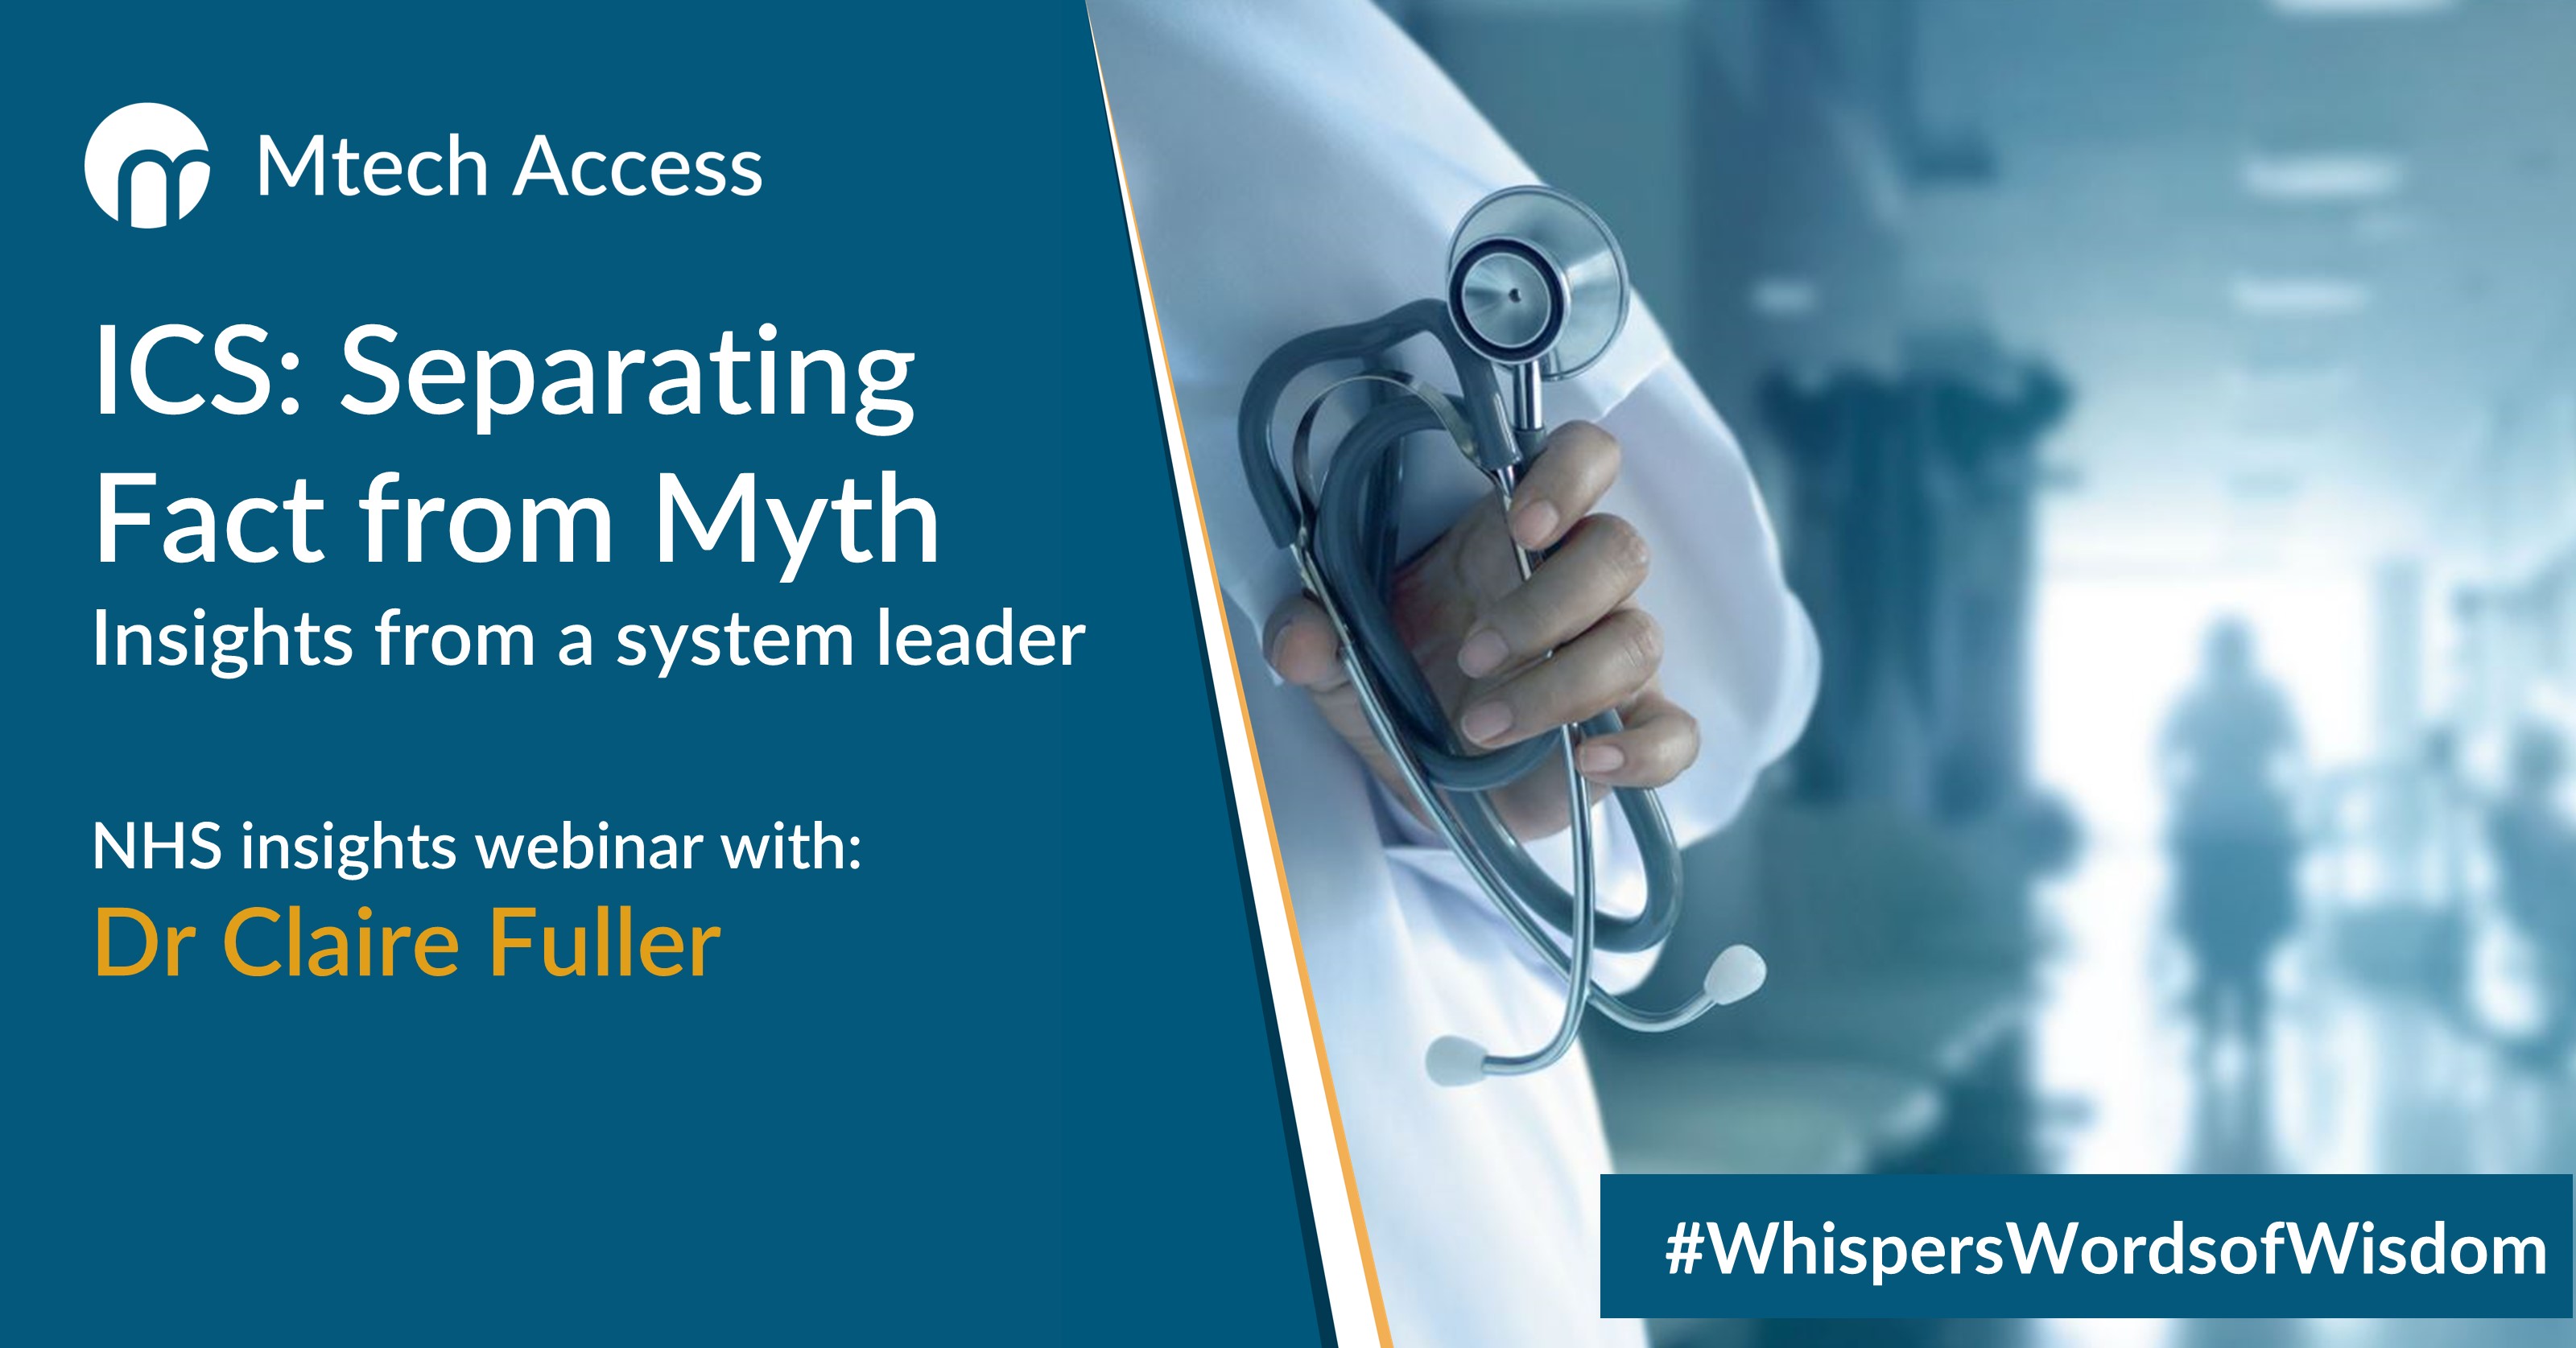 ICS Separating Fact From Myth: Insights from a system leader